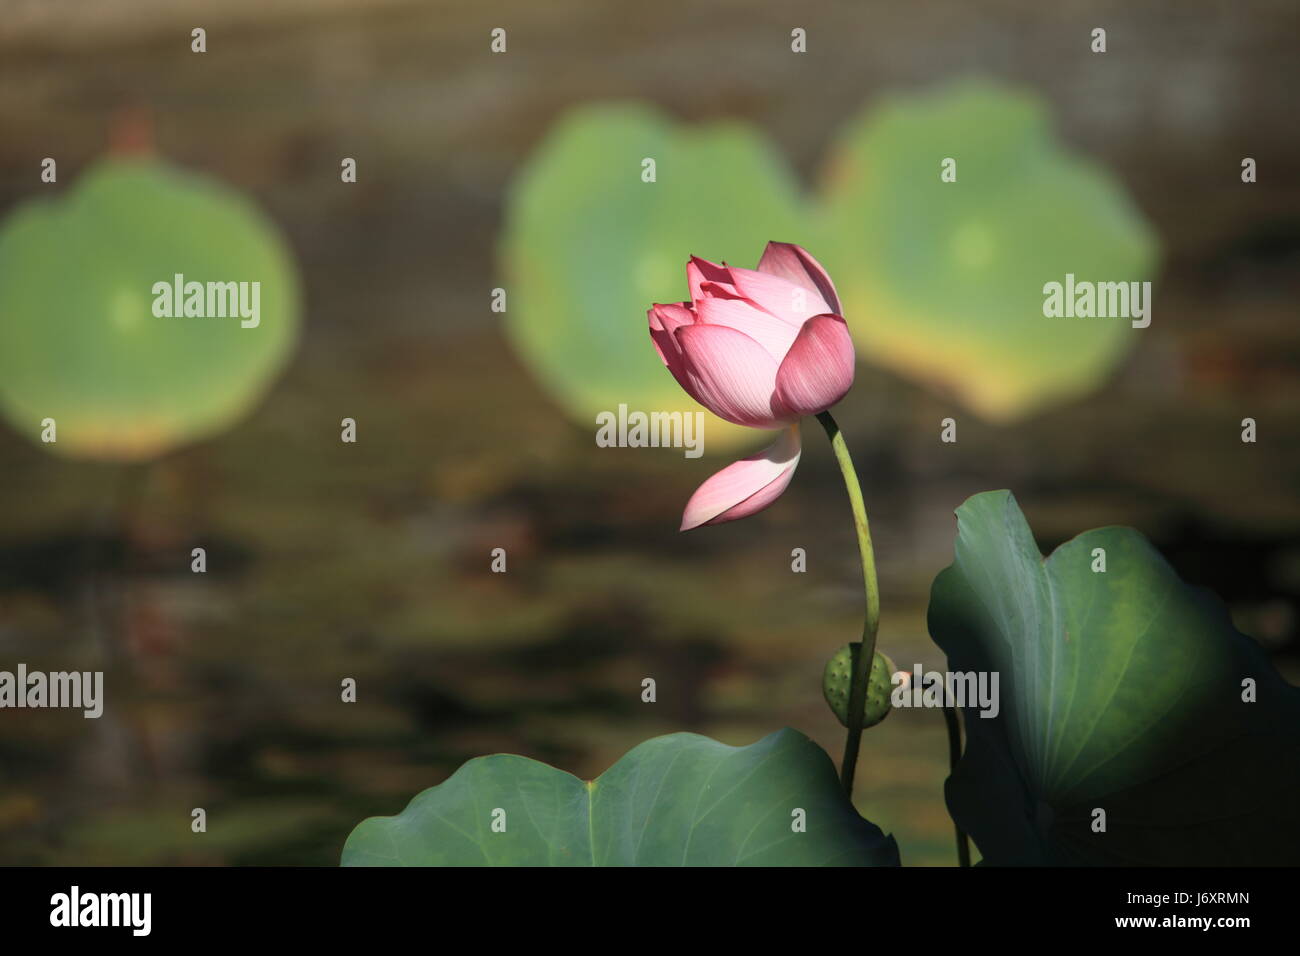 flower plant rose water lily lotus aquatic plant fresh water pond water nature Stock Photo